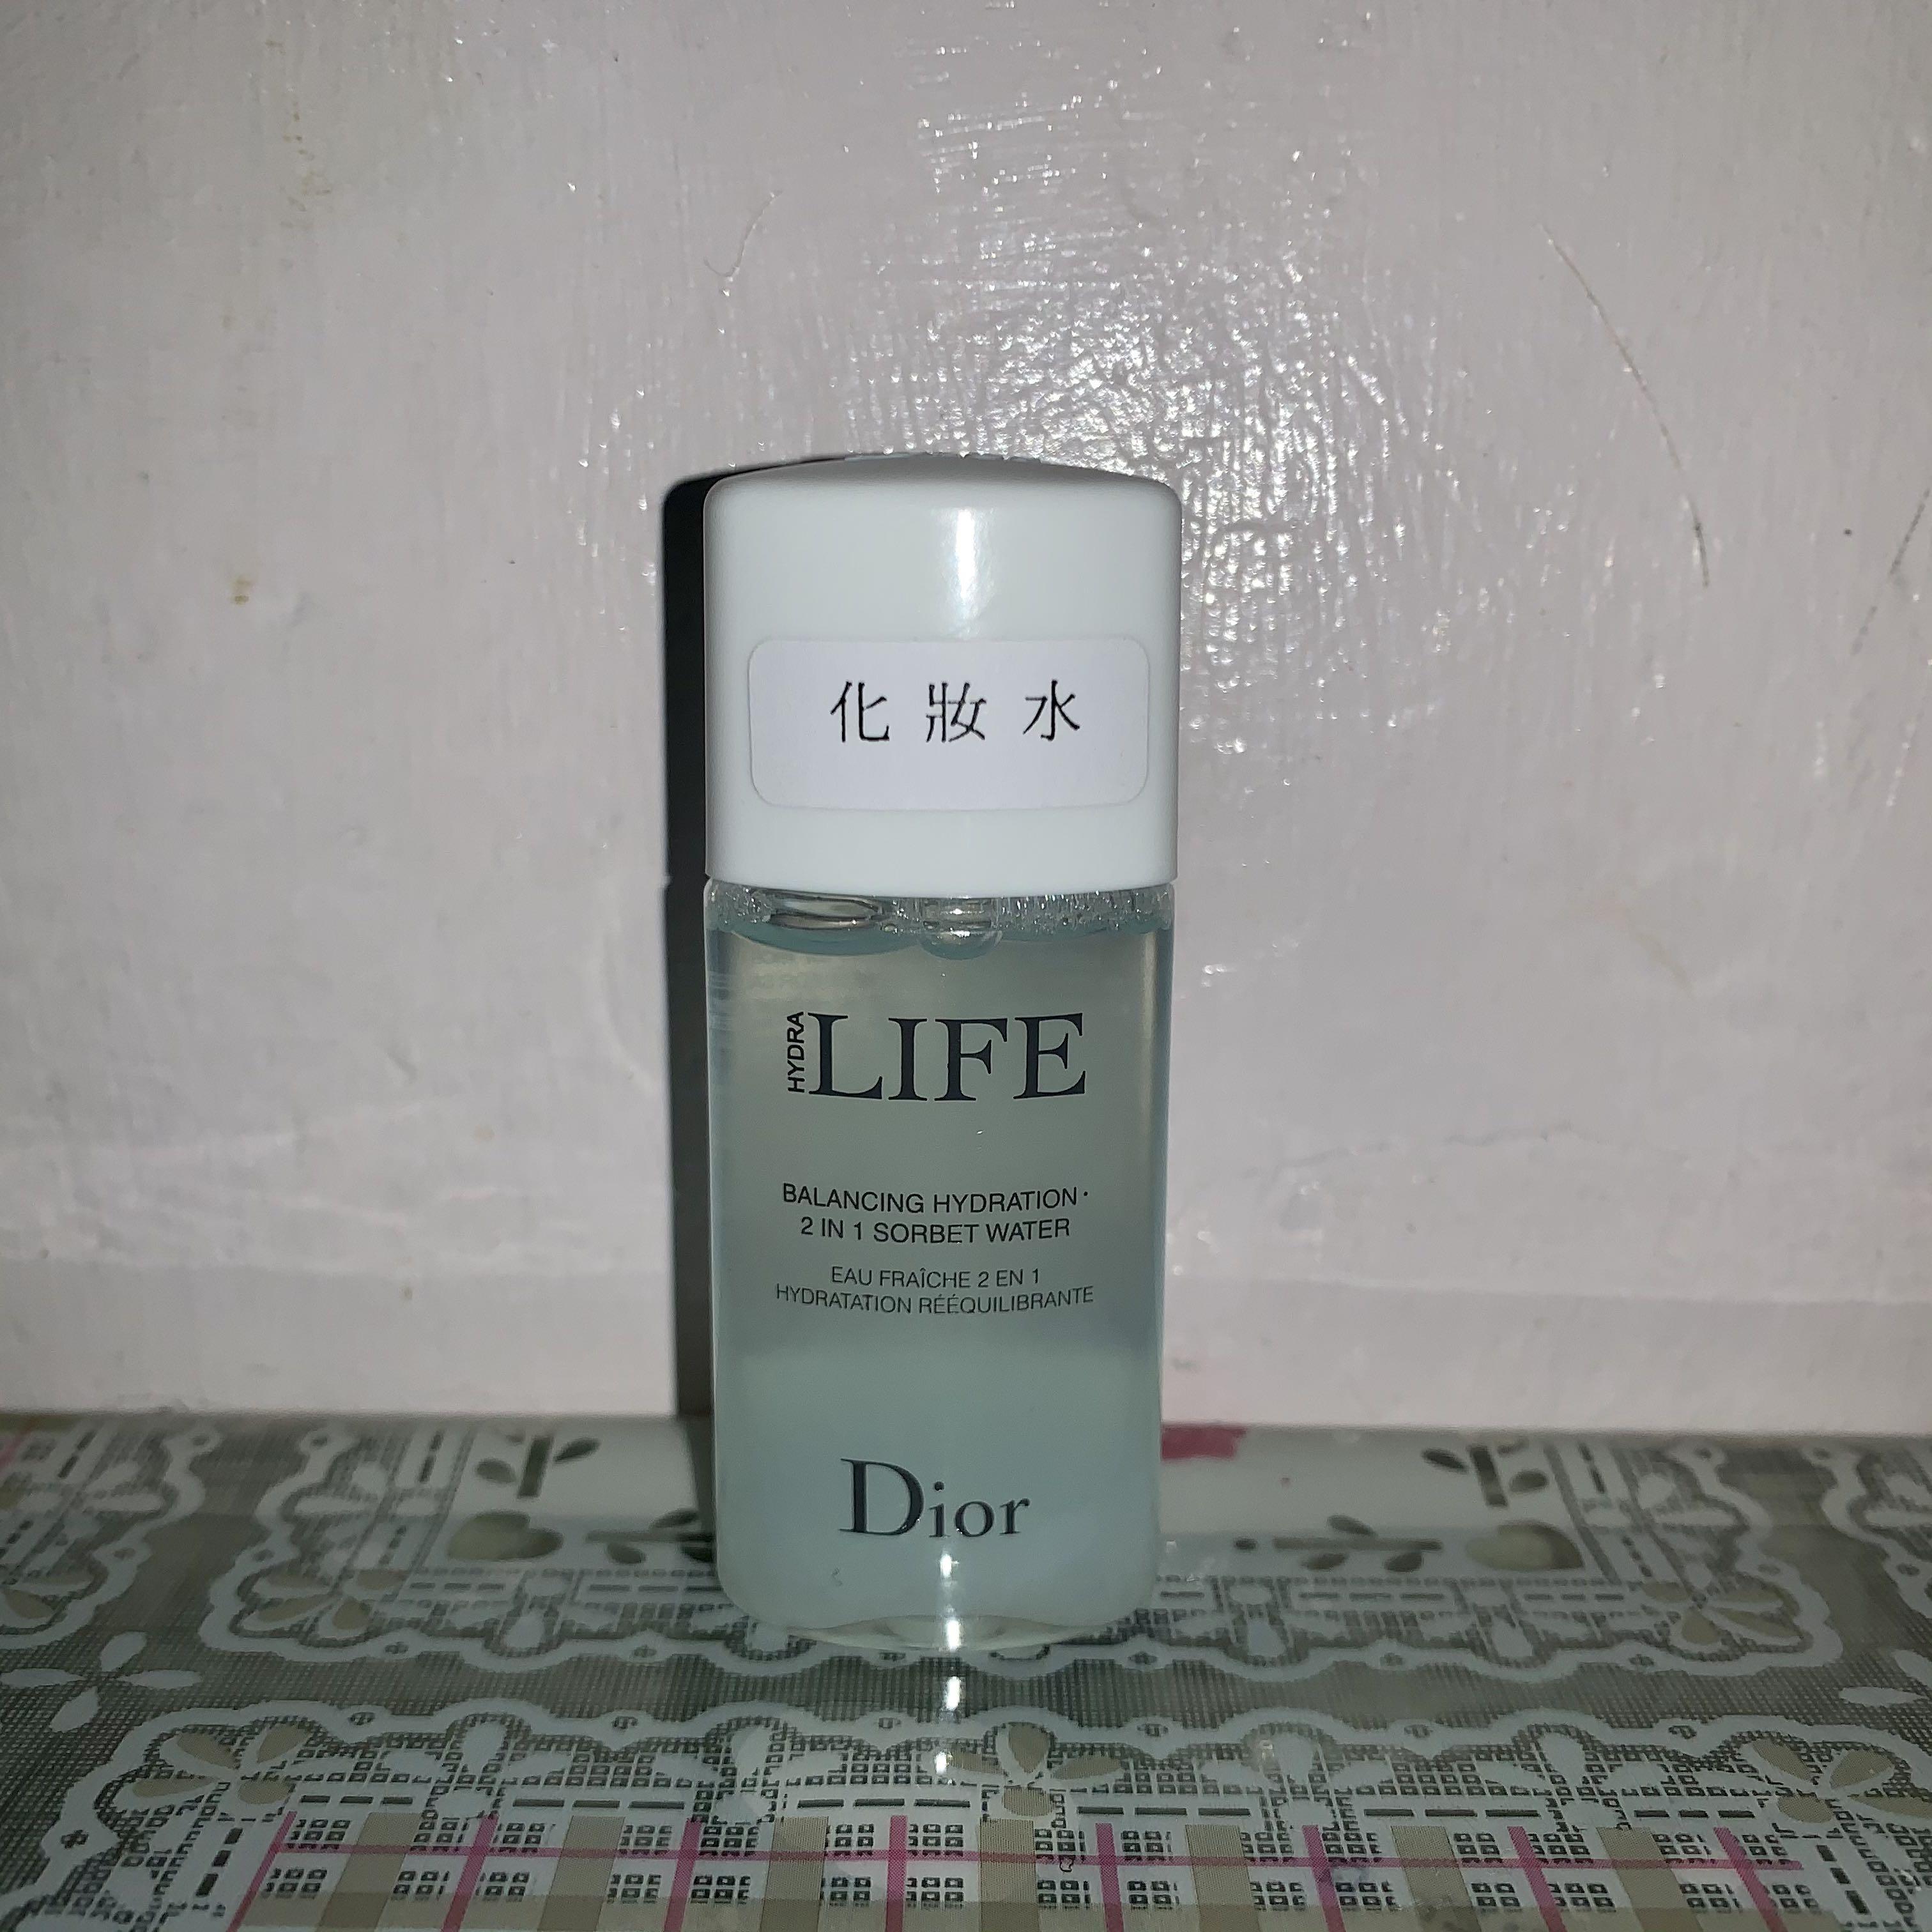 dior balancing hydration 2 in 1 sorbet water